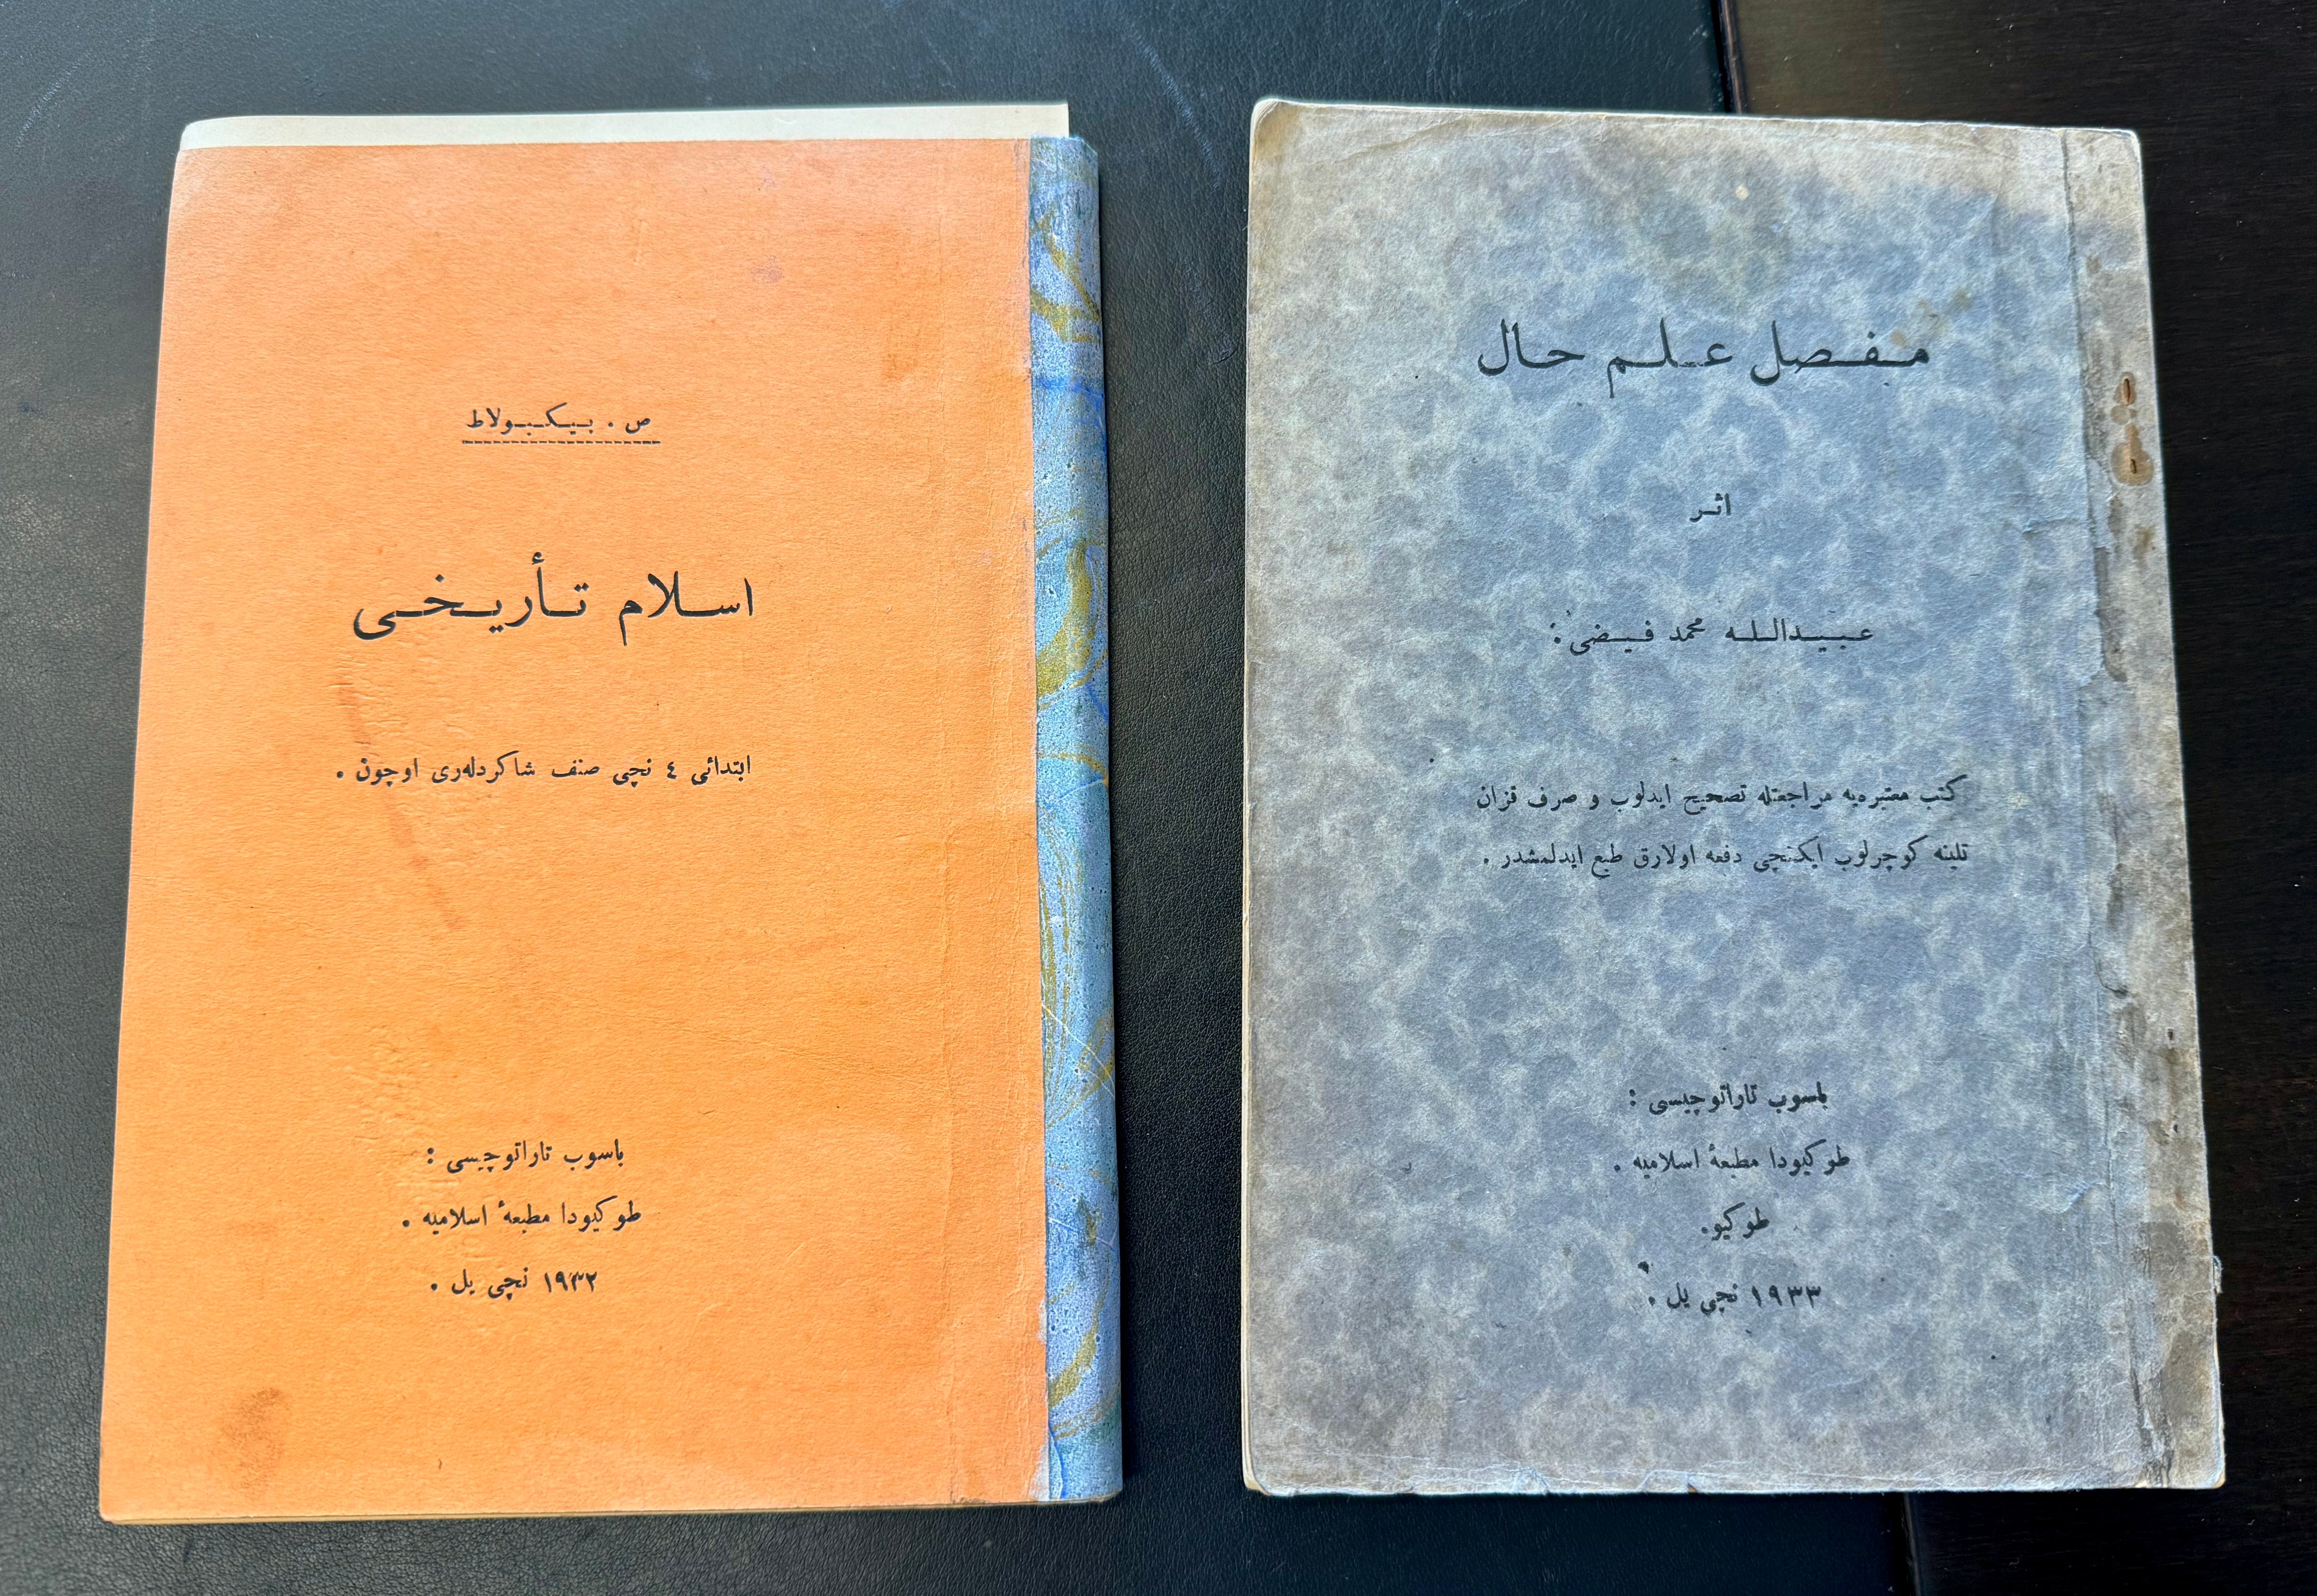 Two books are placed side by side. Both have Arabic text on their covers.  The book on the left has an orange cover with blue binding, while the one on the right has a greyish-blue cover with a textured appearance. 